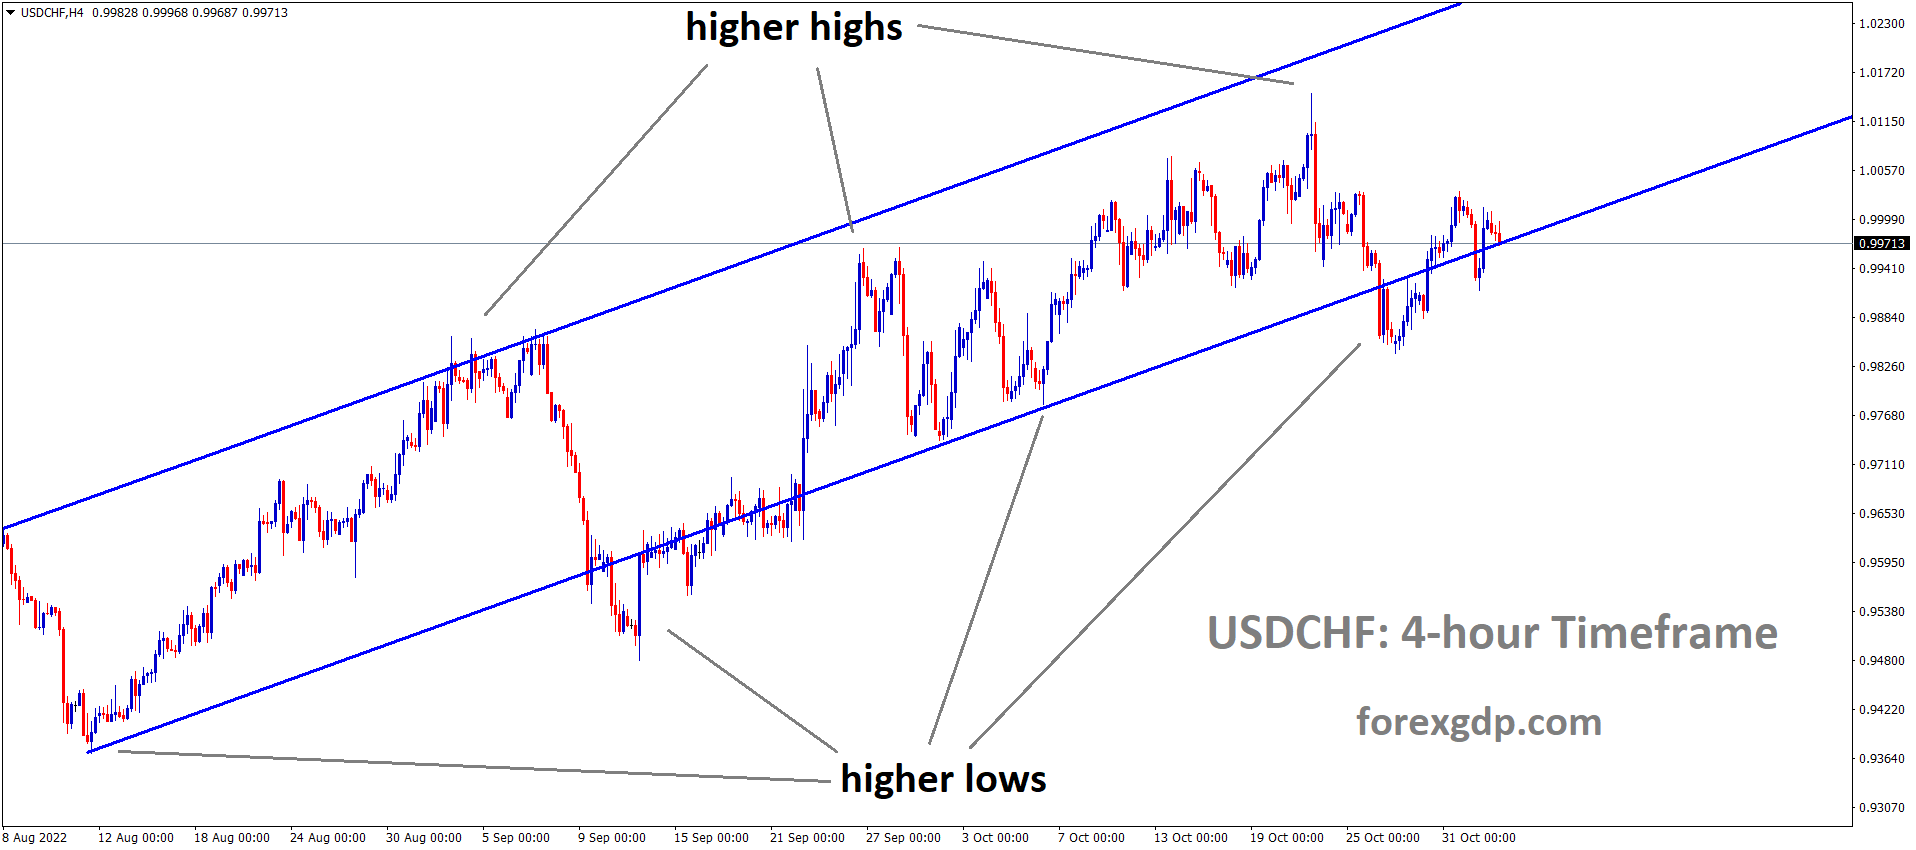 USDCHF is moving in an Ascending channel and the market has reached the higher low area of the channel1